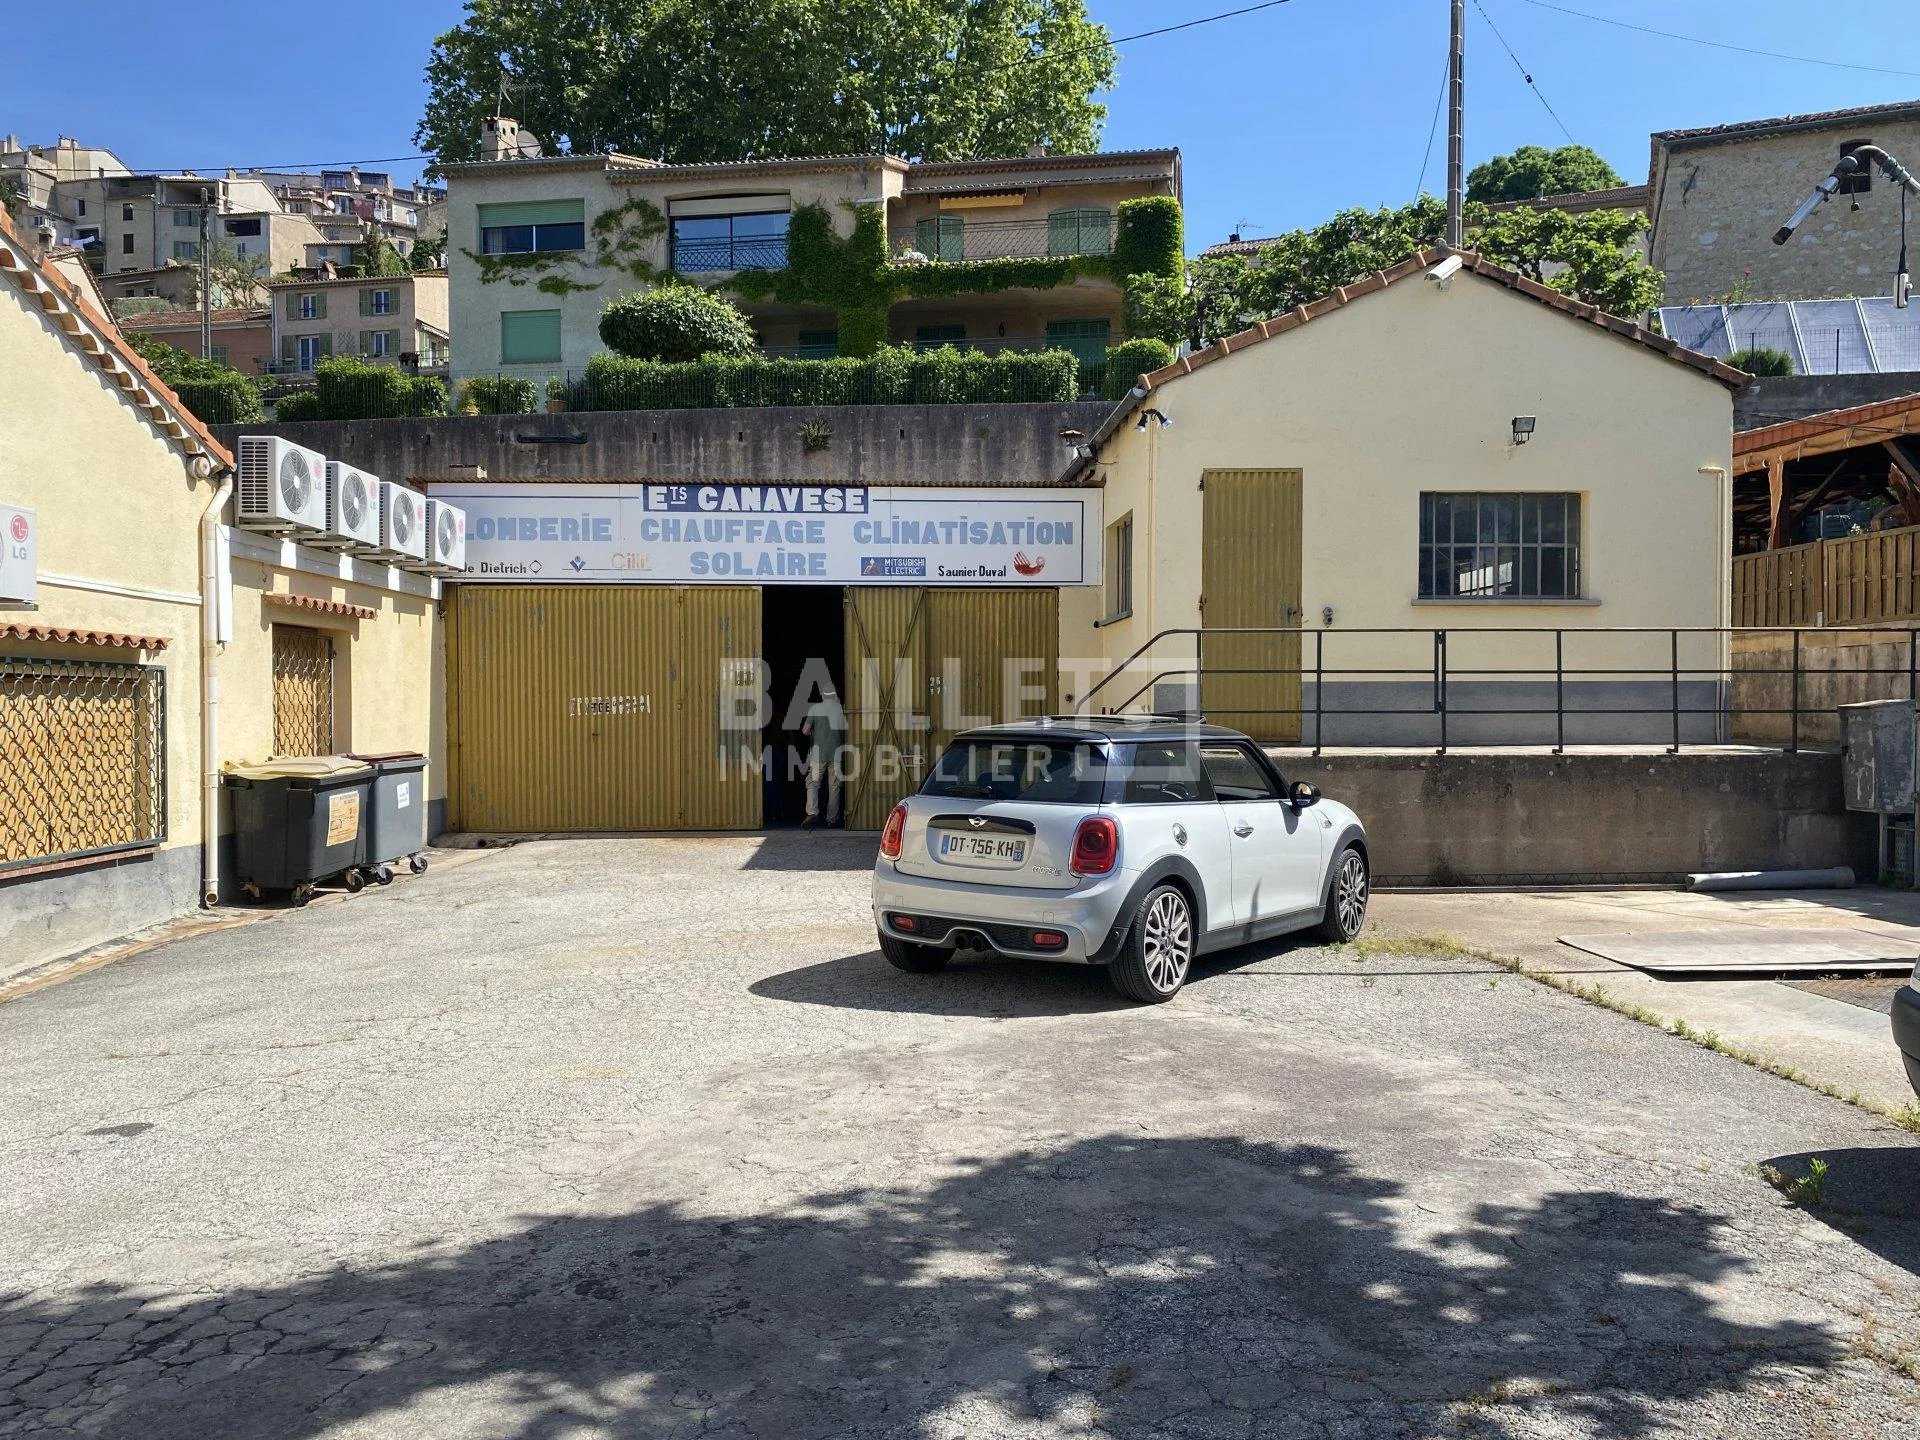 Retail in Fayence, Provence-Alpes-Cote d'Azur 11888357